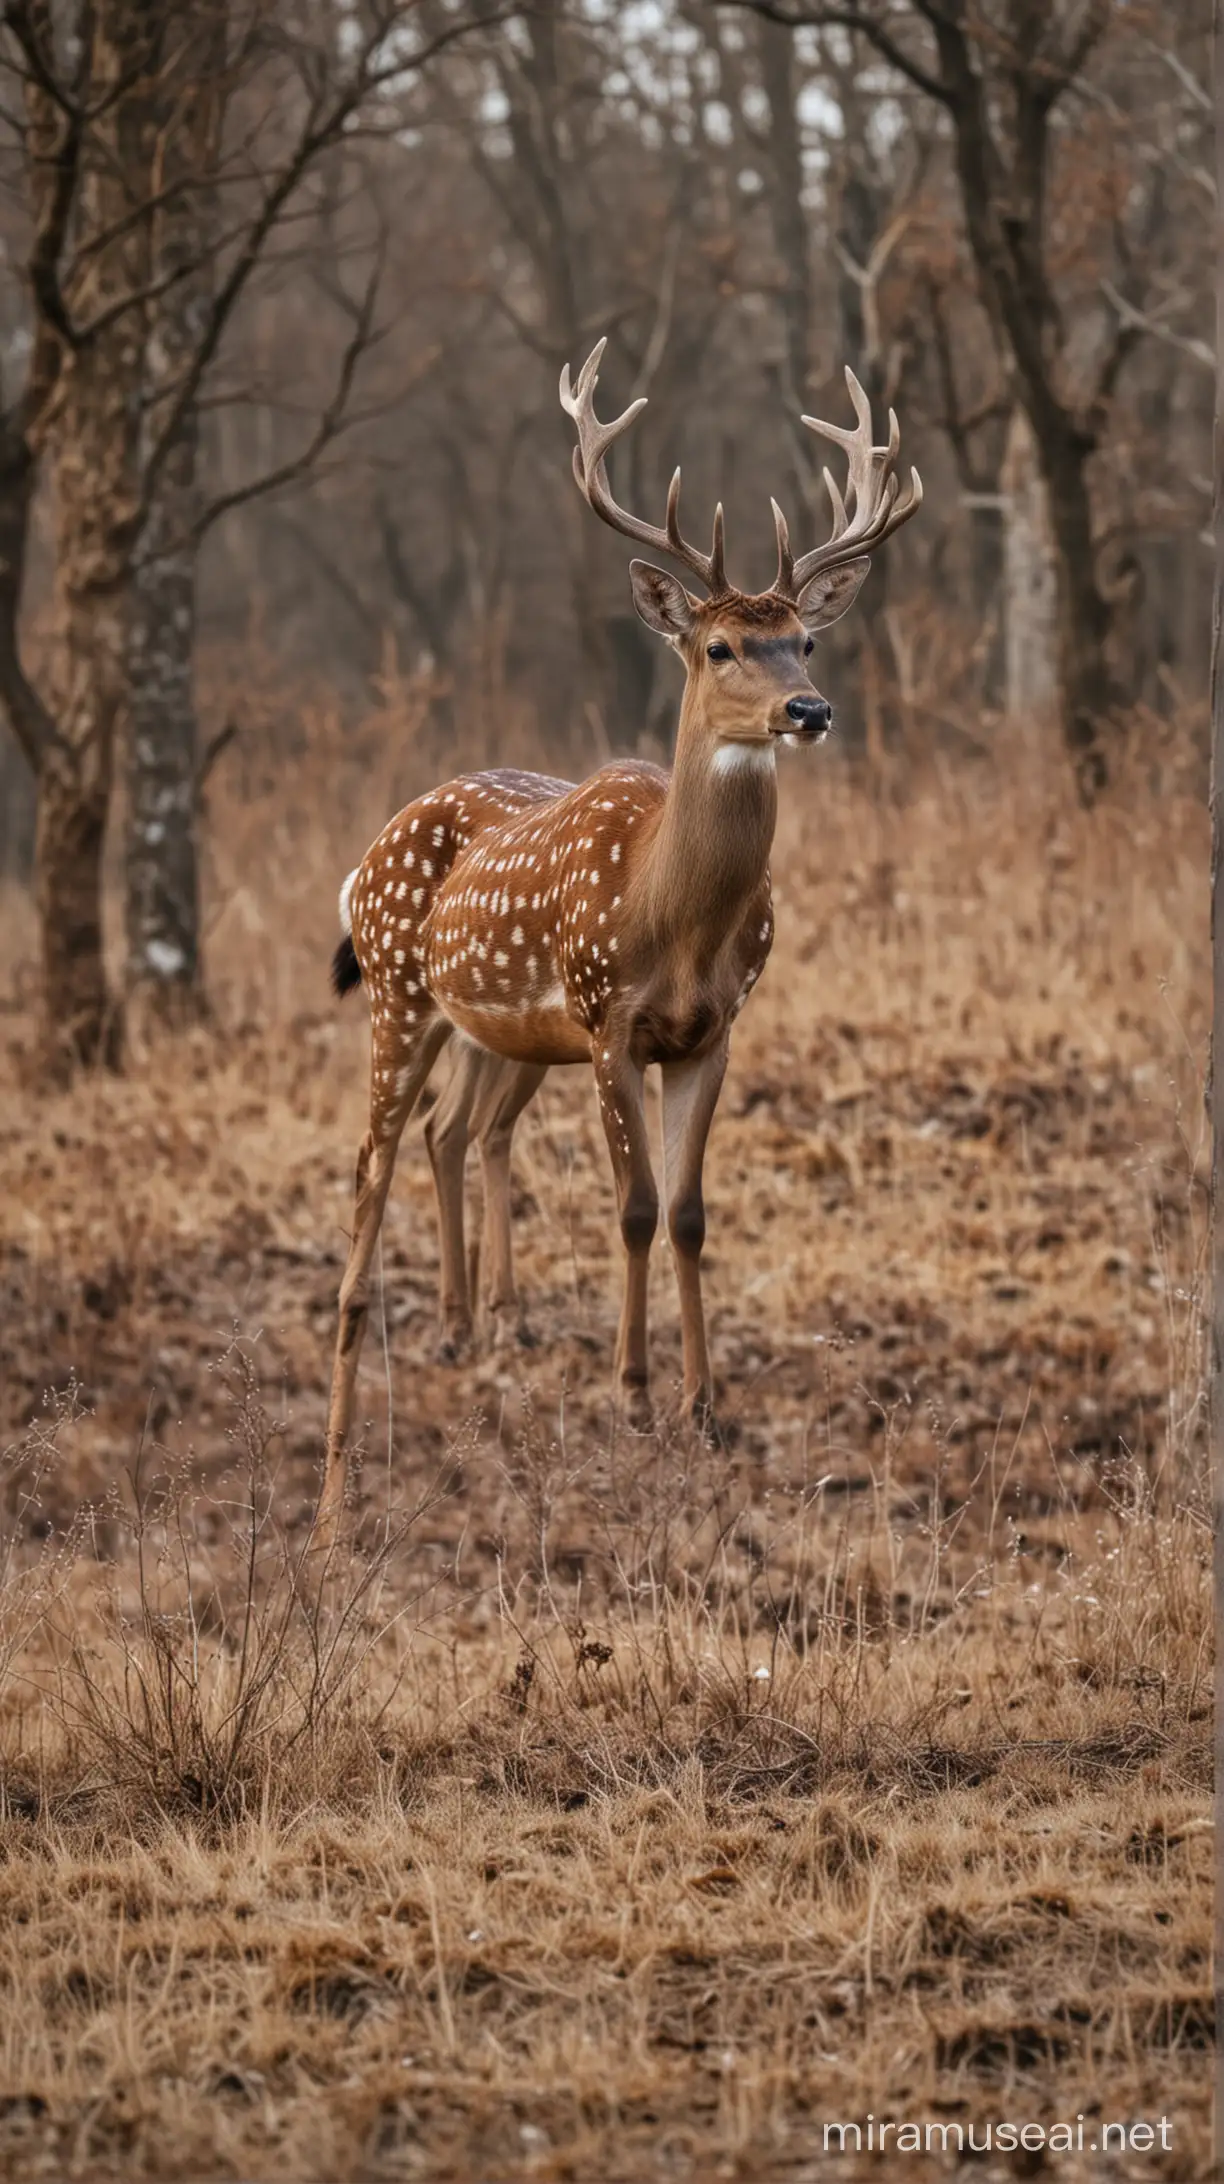 in one frame there are - a spotted deer with large horns, a large deer, a wild boar, three roe deer